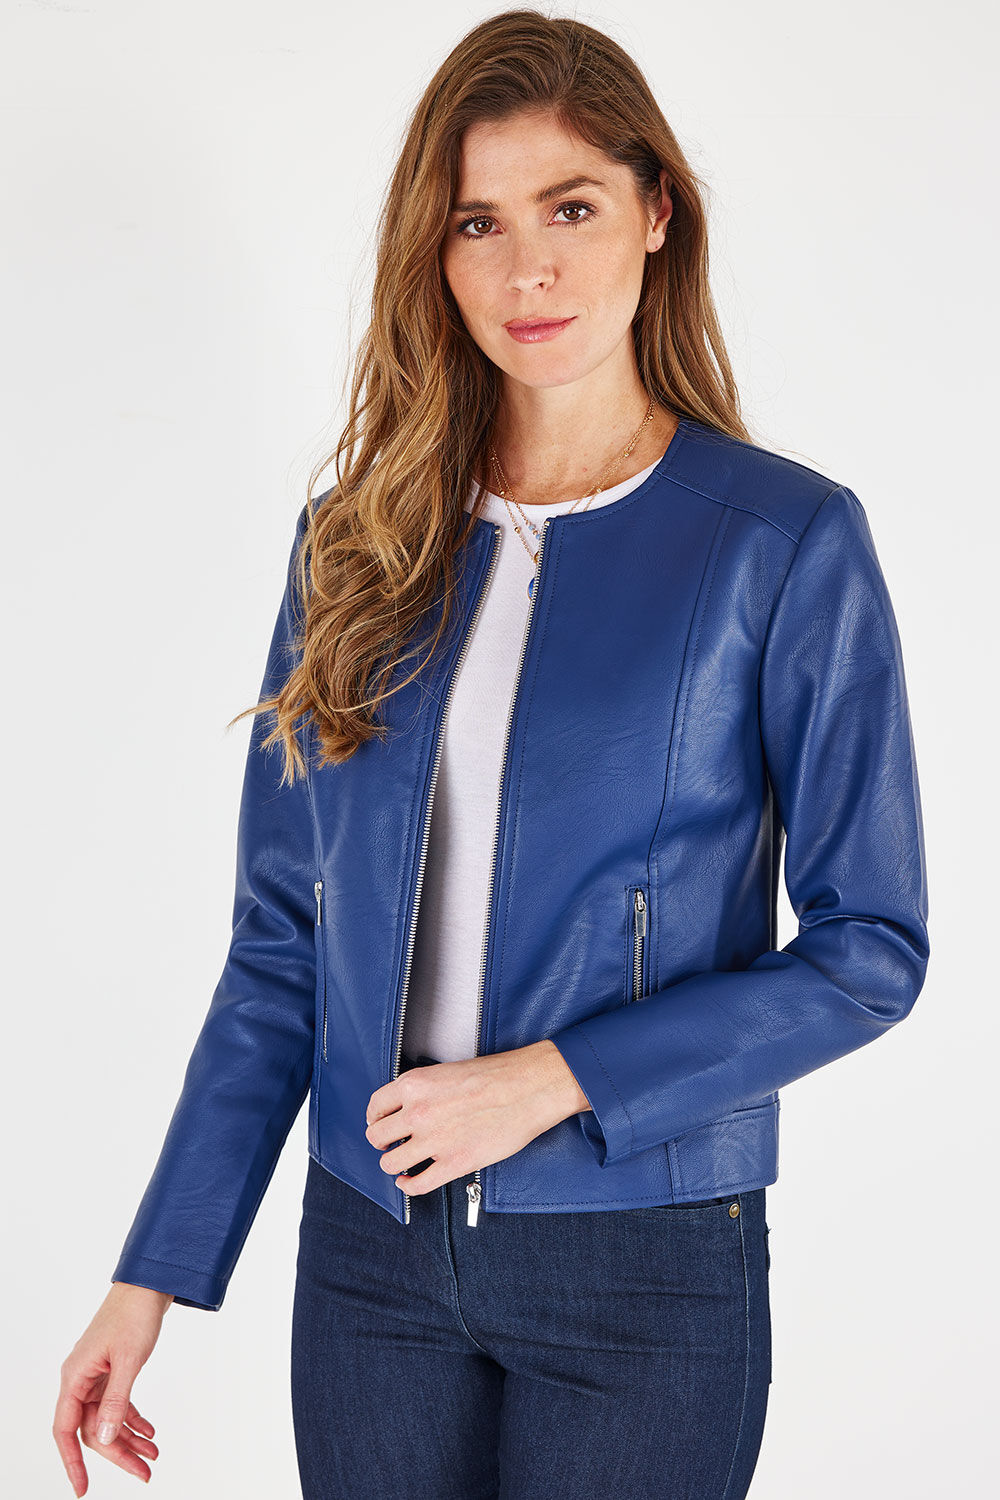 Bonmarche Navy Faux Leather Collarless Jacket, Size: 14